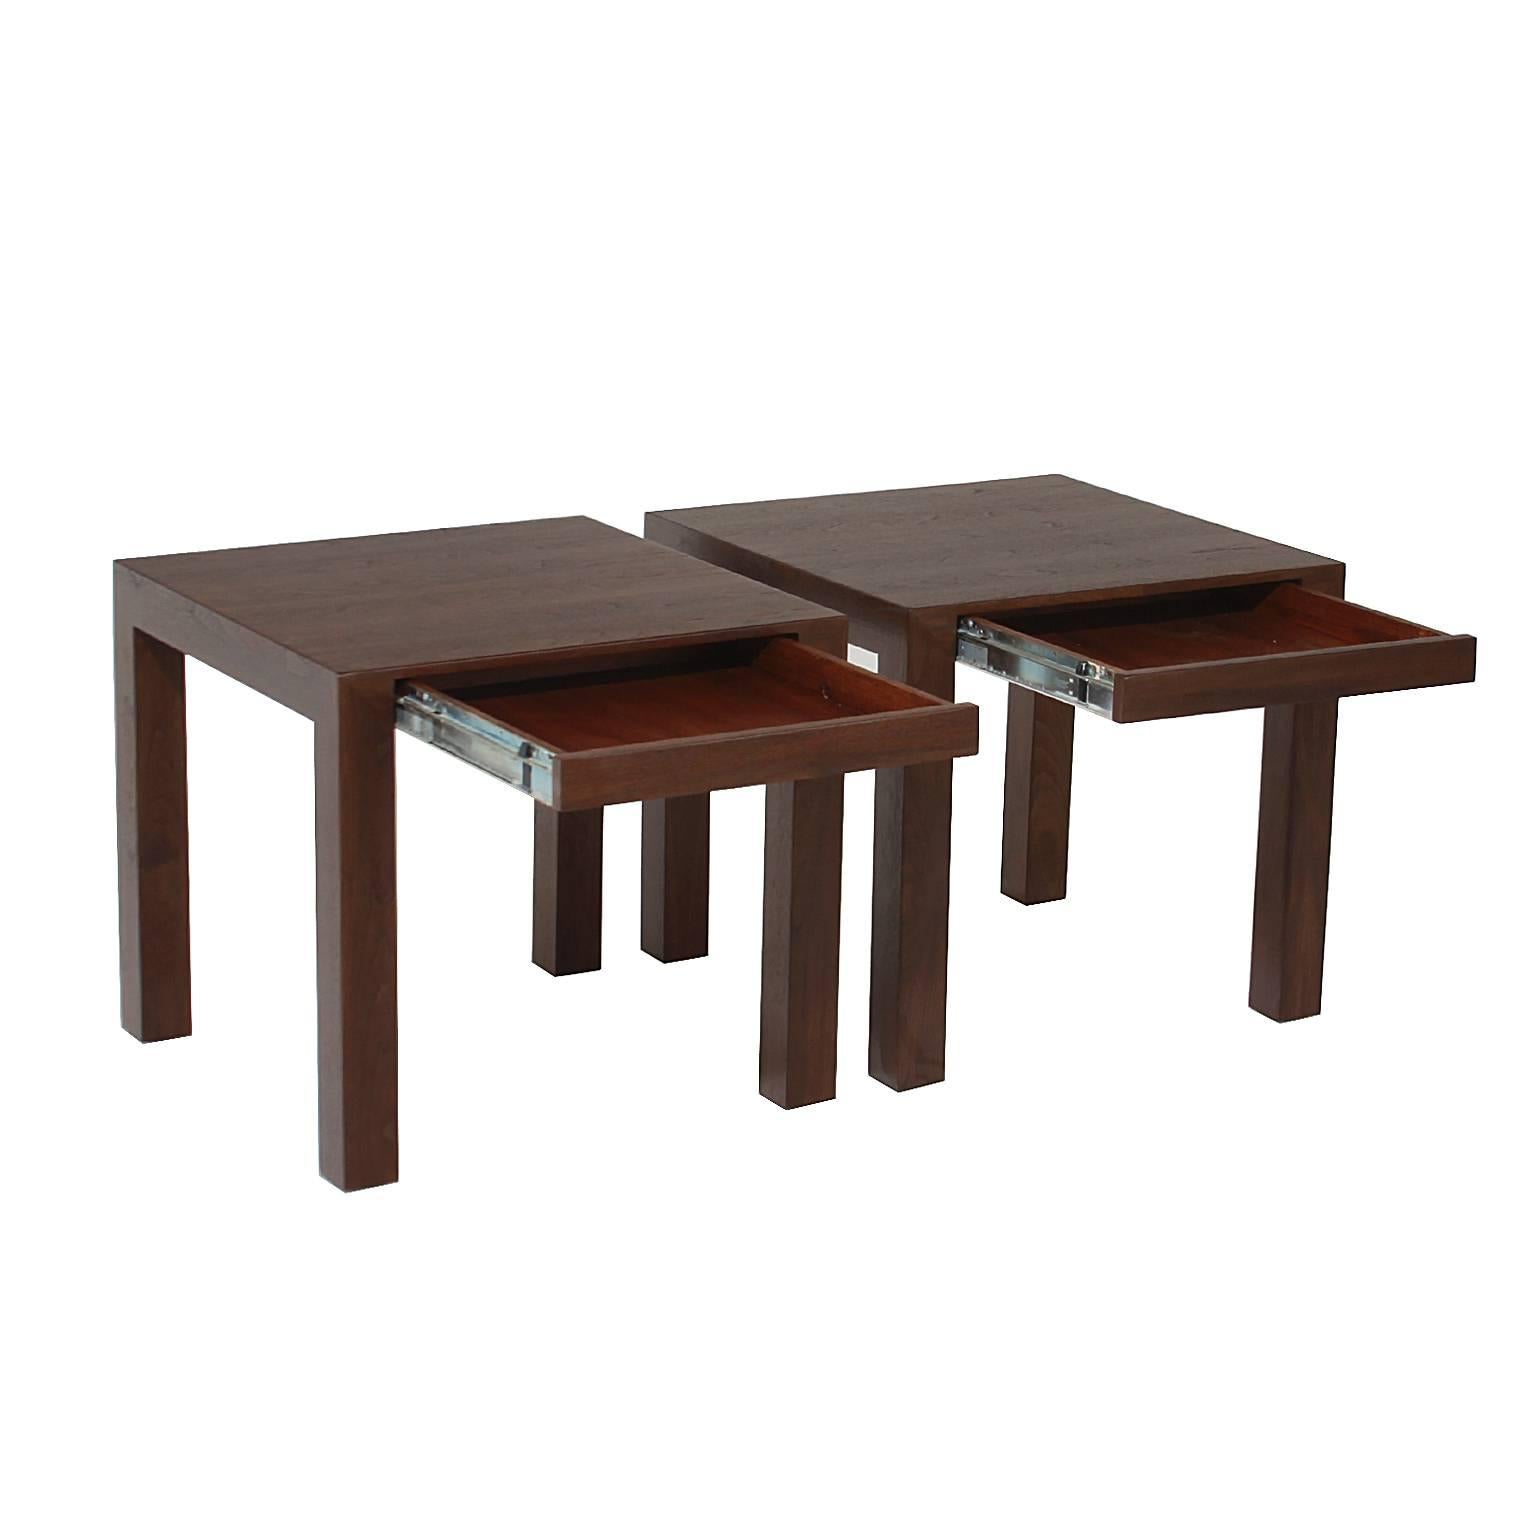 Pair of Minimal walnut side tables with Drawers.

 